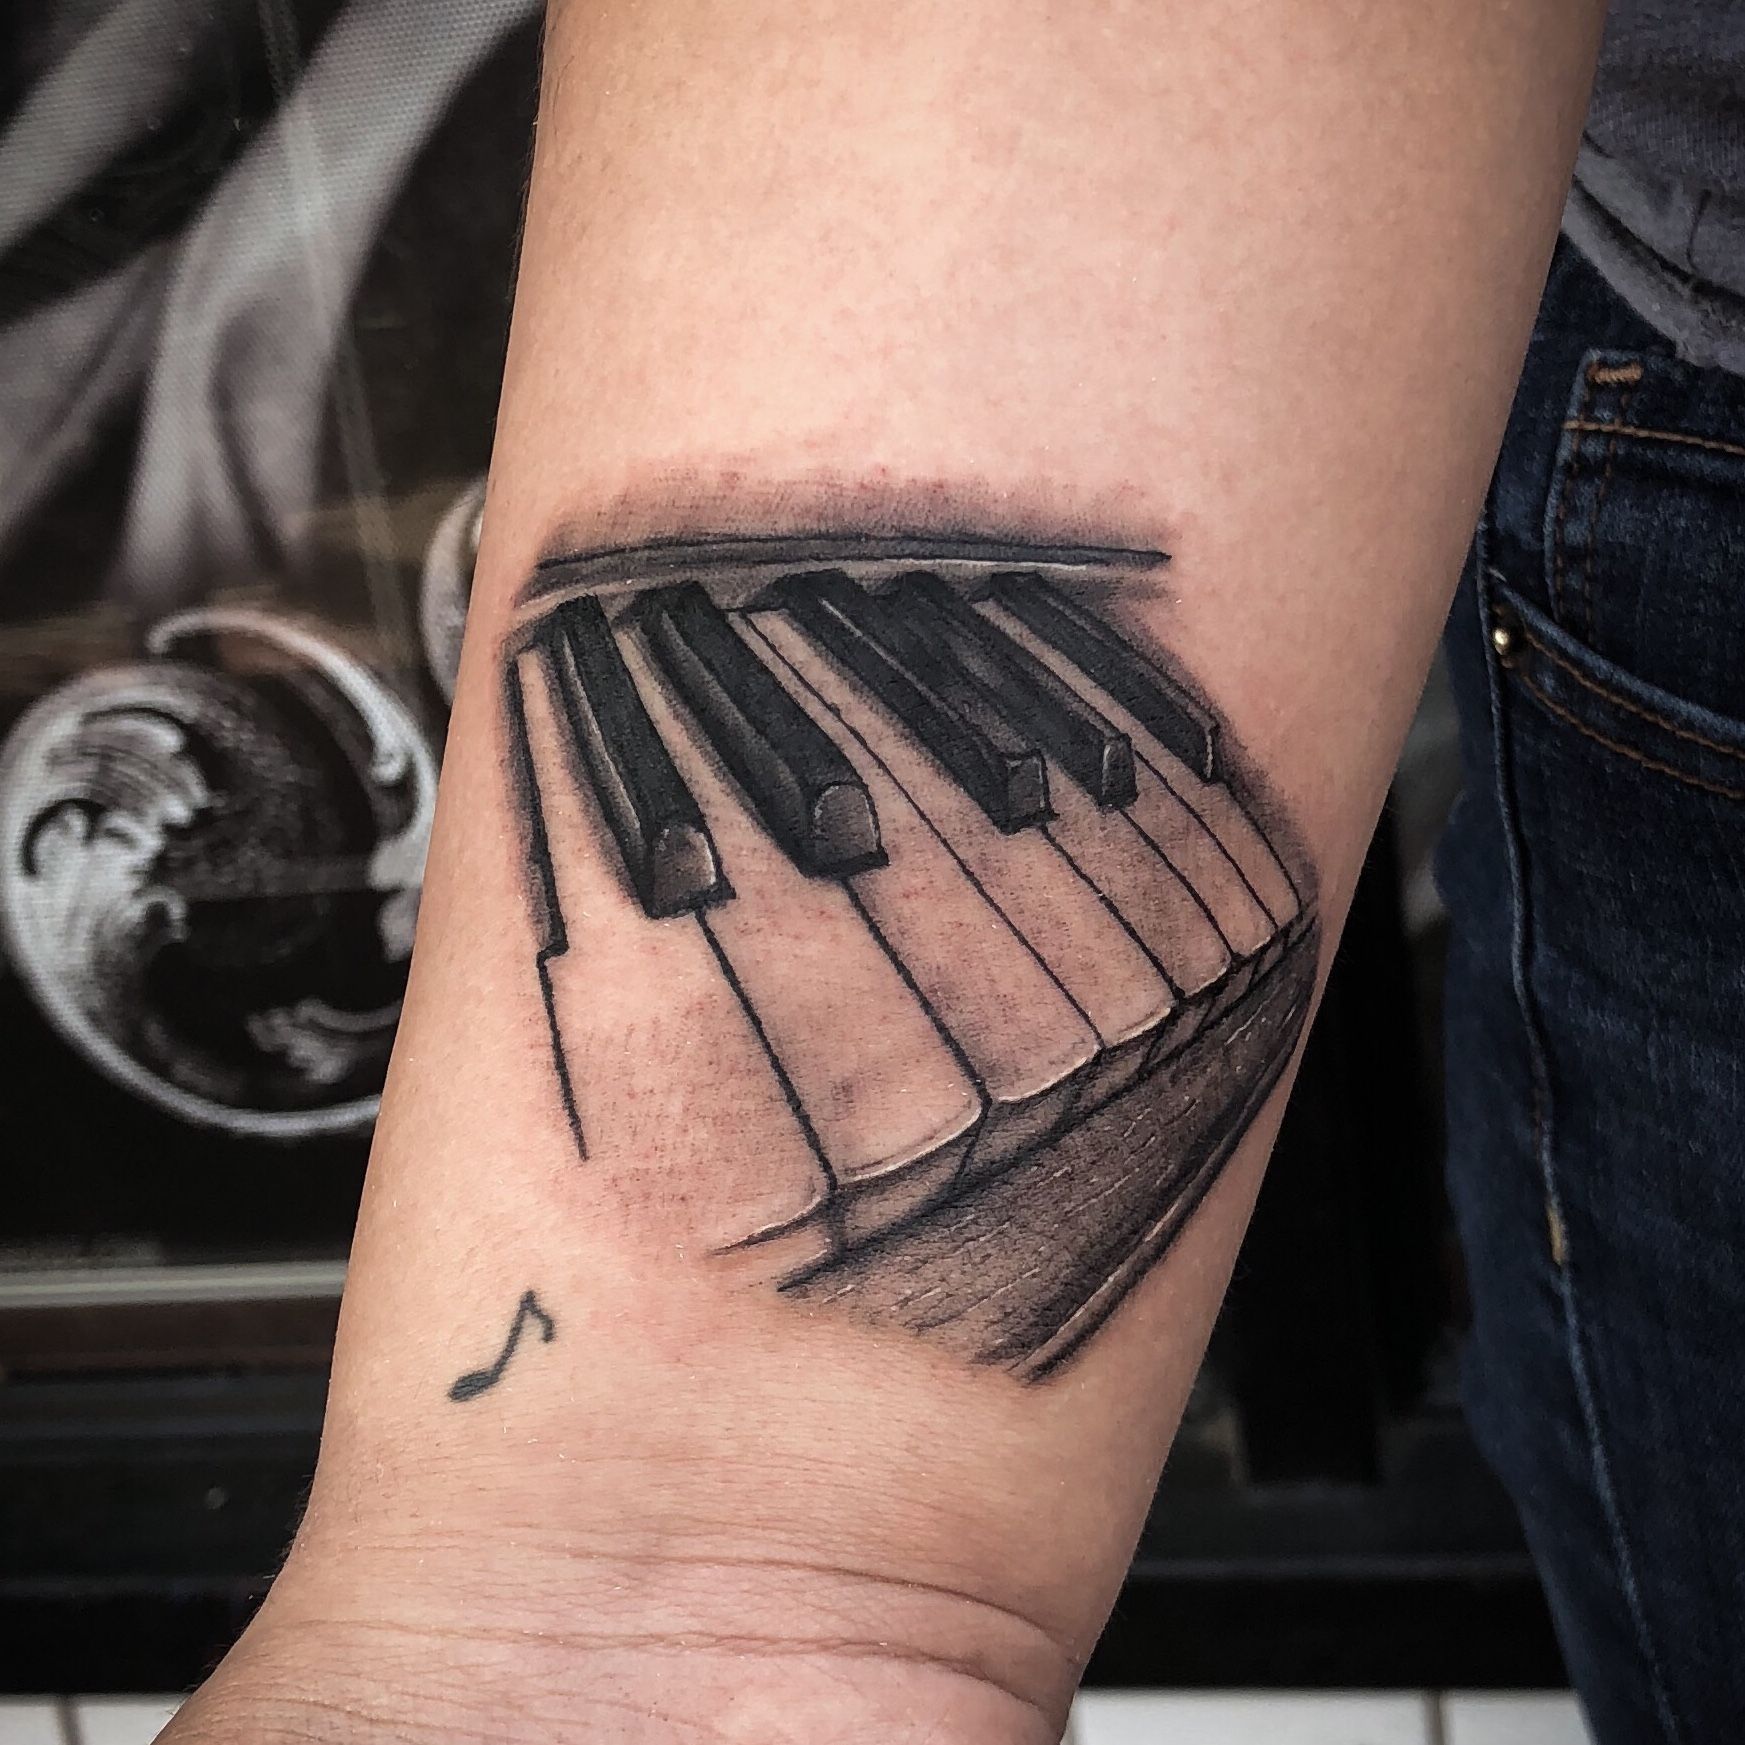 60 Piano Tattoos For Men  Music Instrument Ink Design Ideas  Piano tattoo  Trendy tattoos Music tattoos